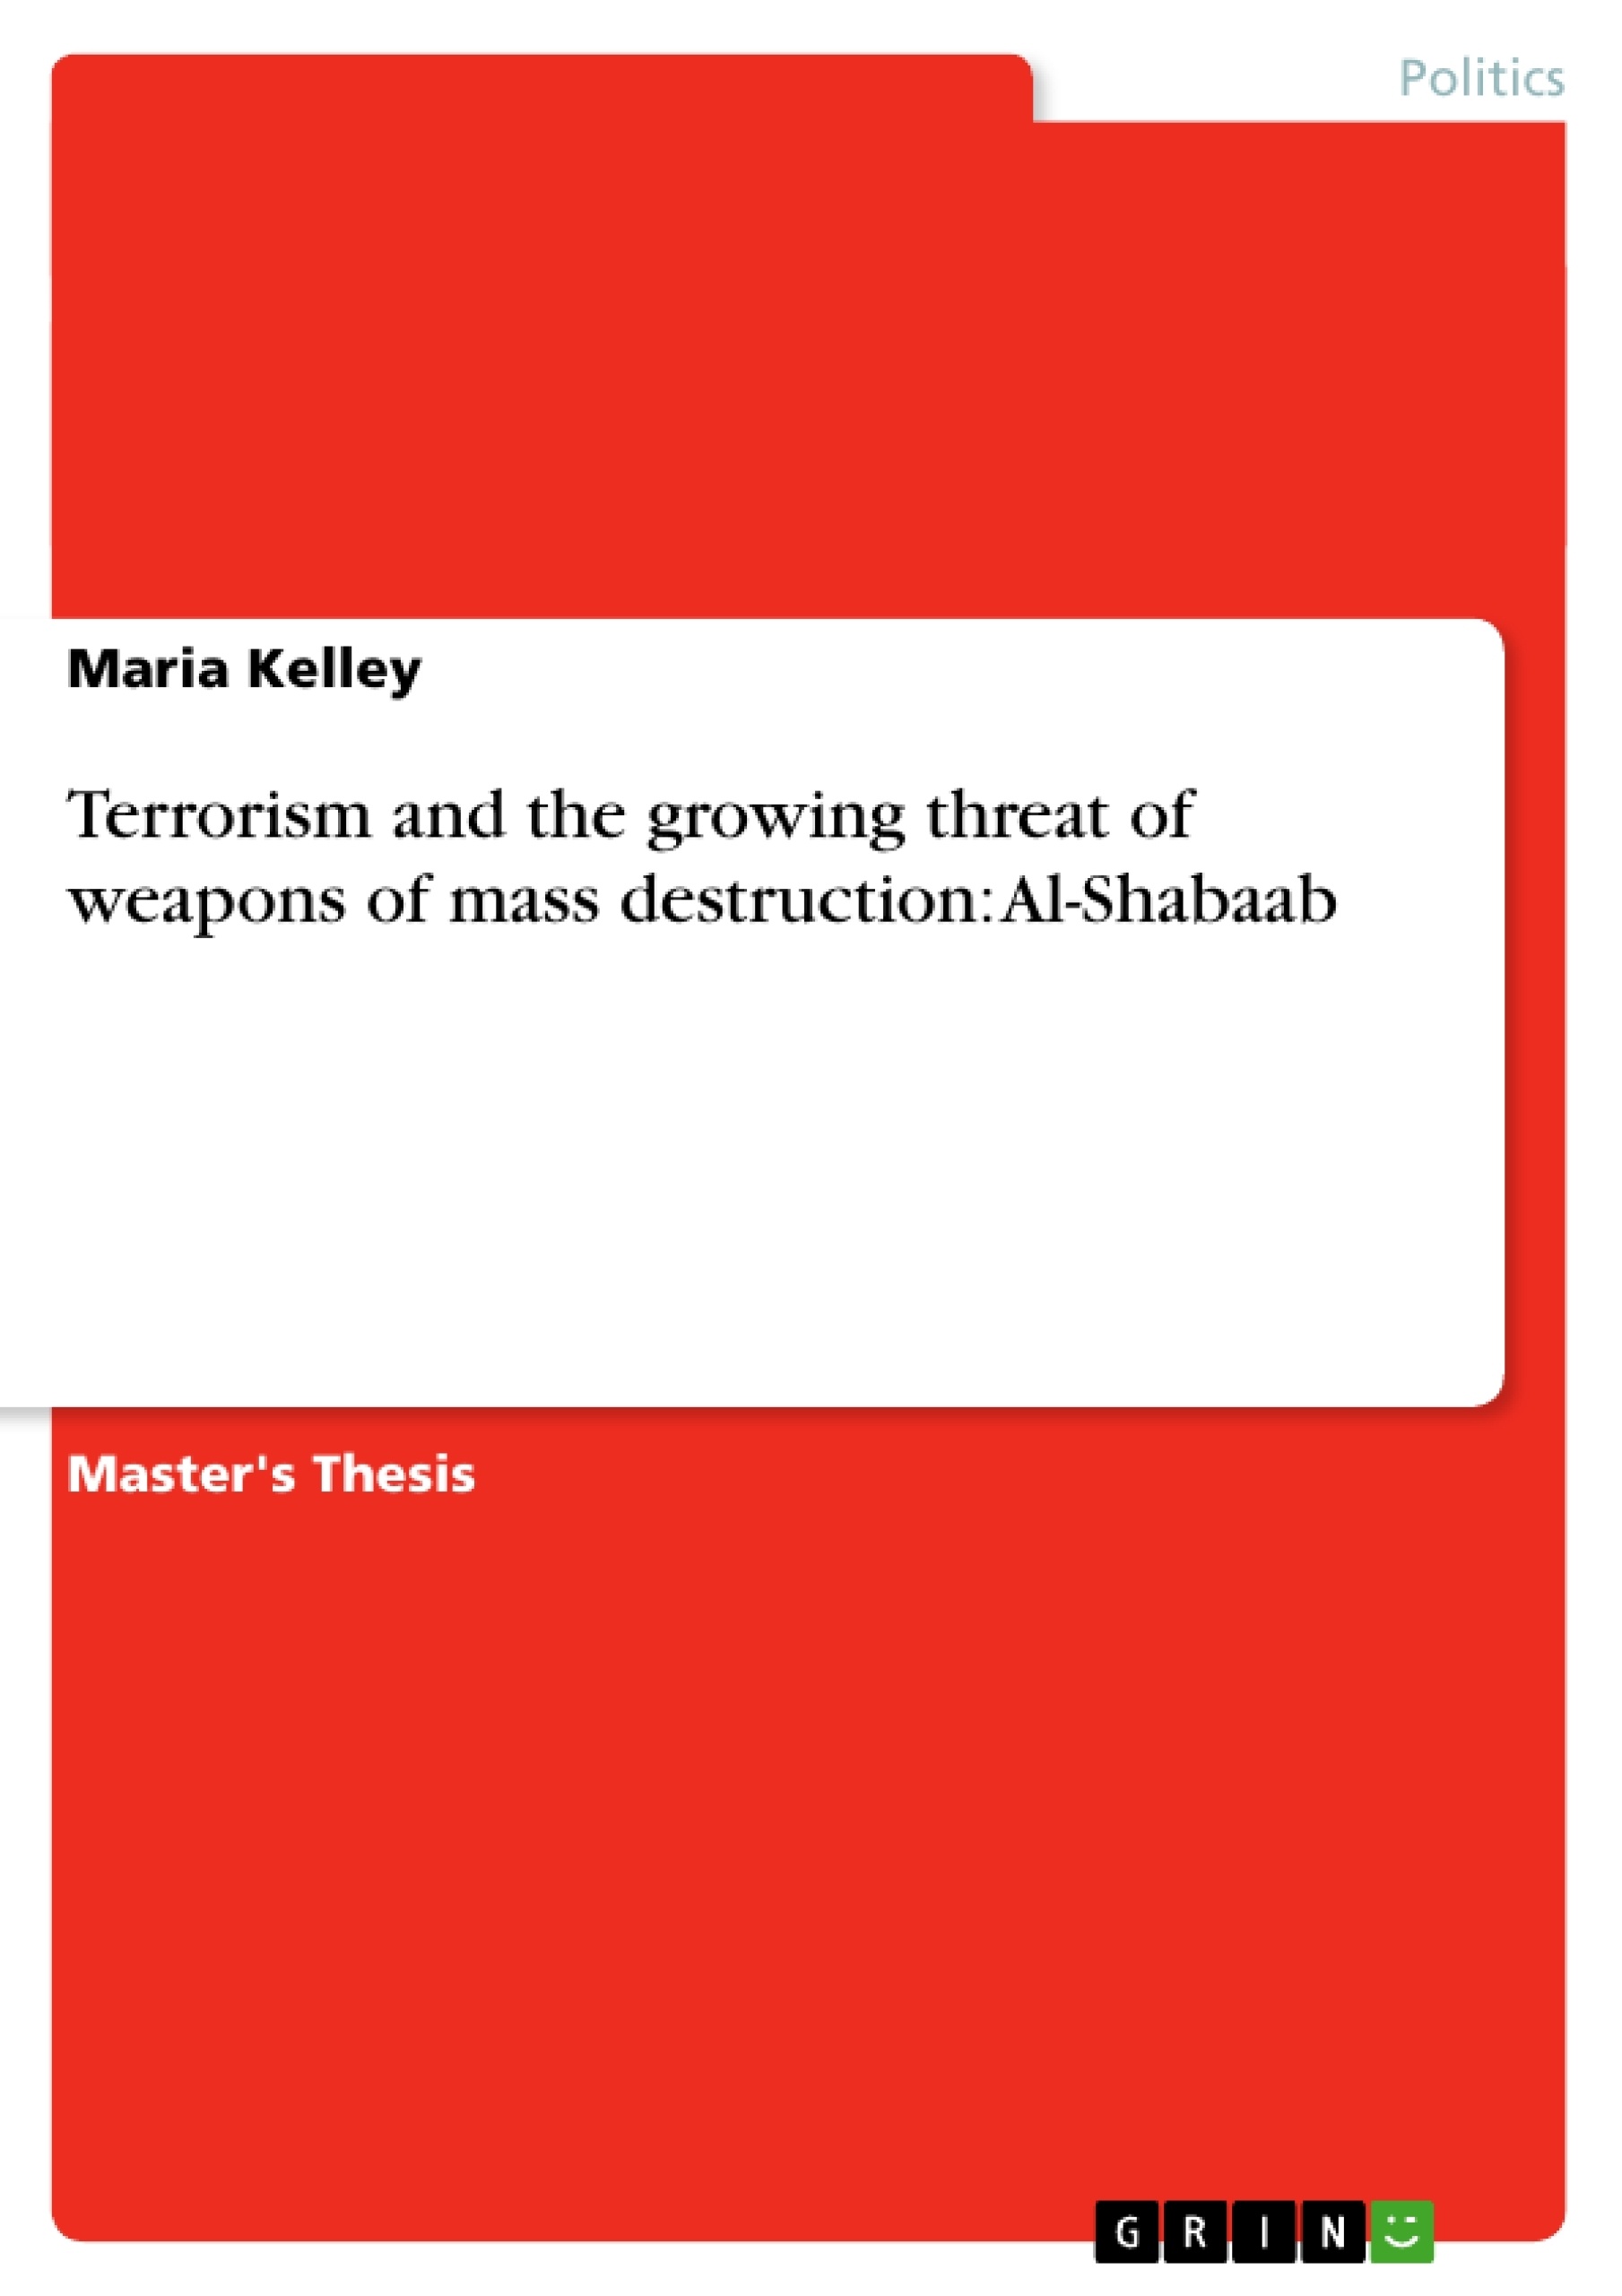 Título: Terrorism and the growing threat of weapons of mass destruction: Al-Shabaab